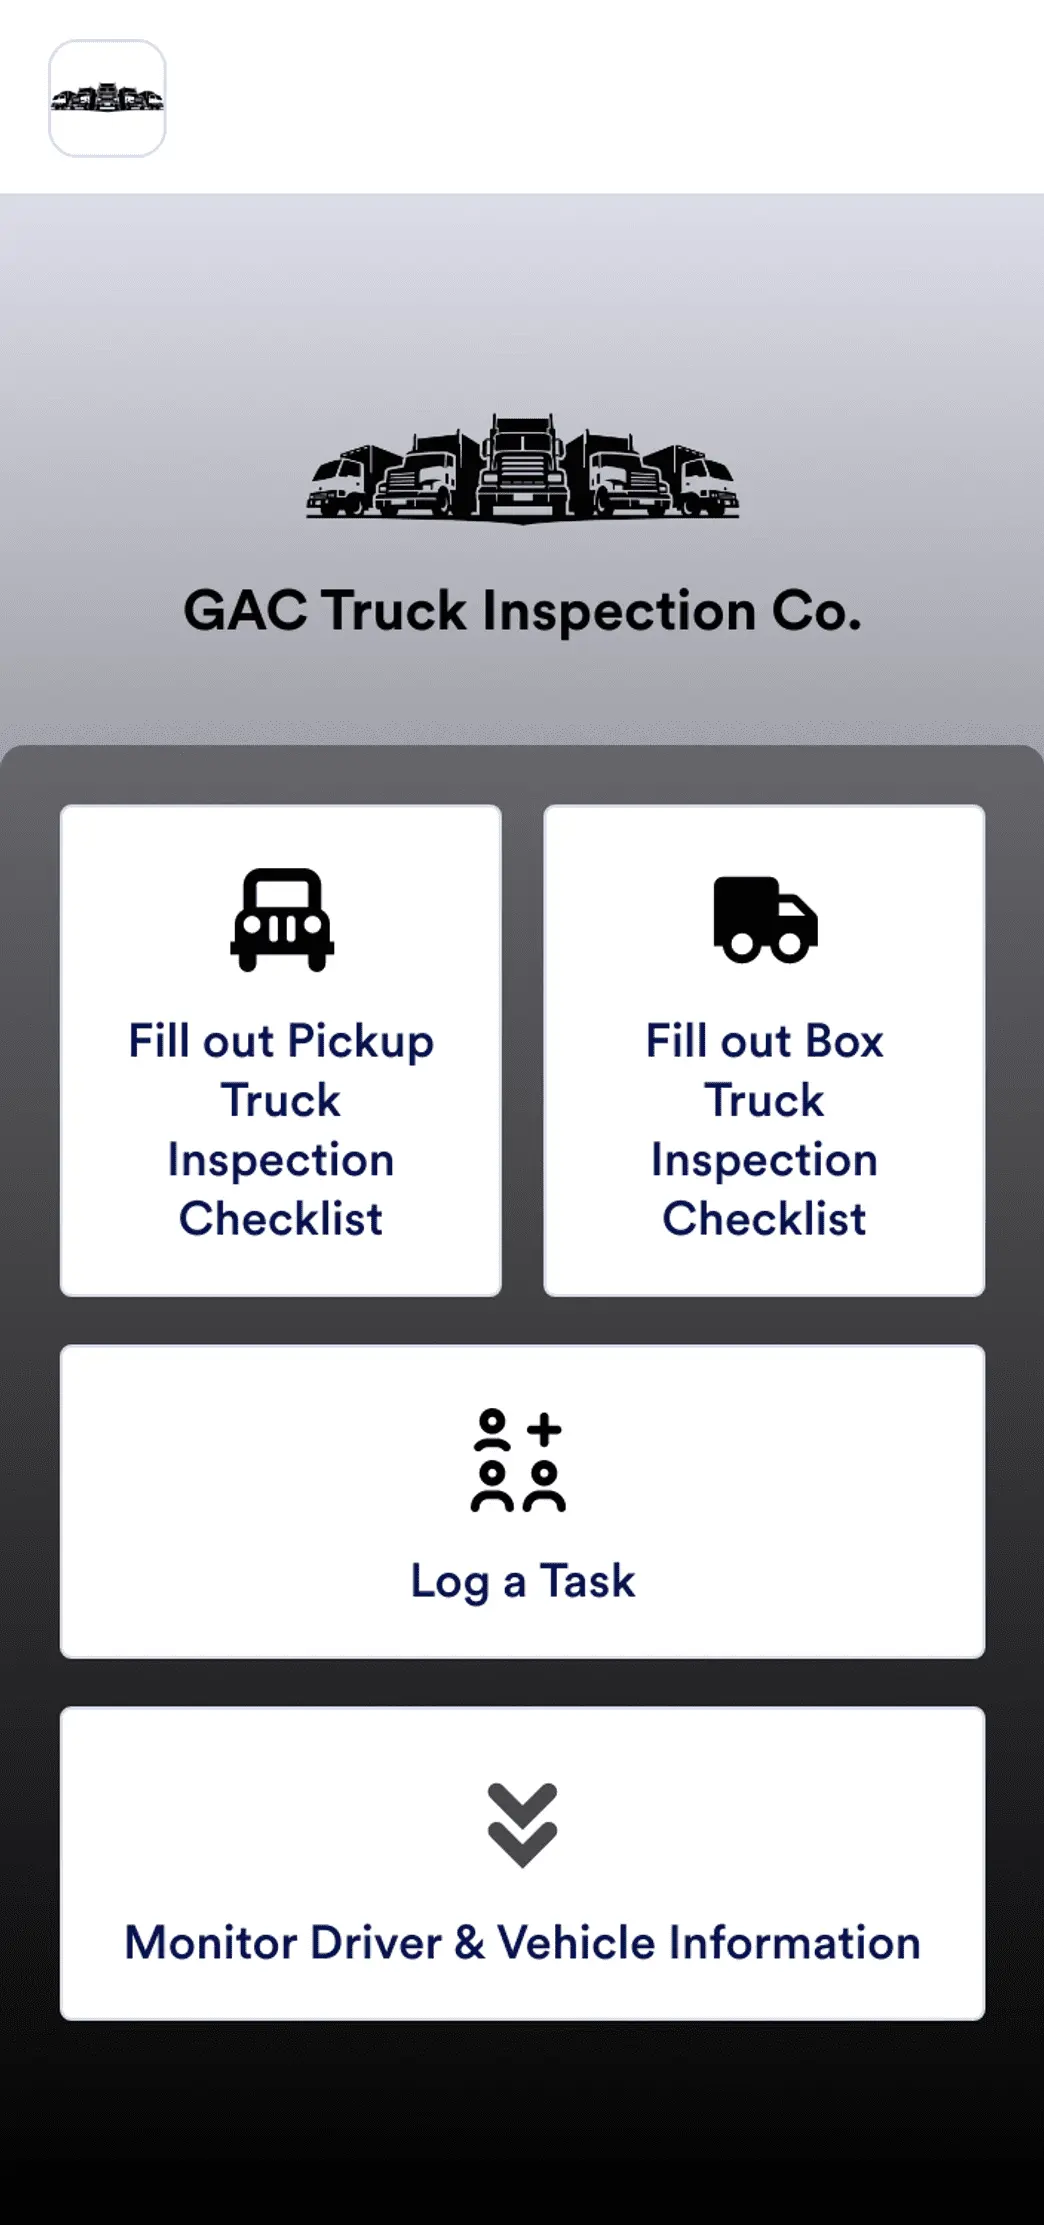 Pre Operational Truck Inspection App